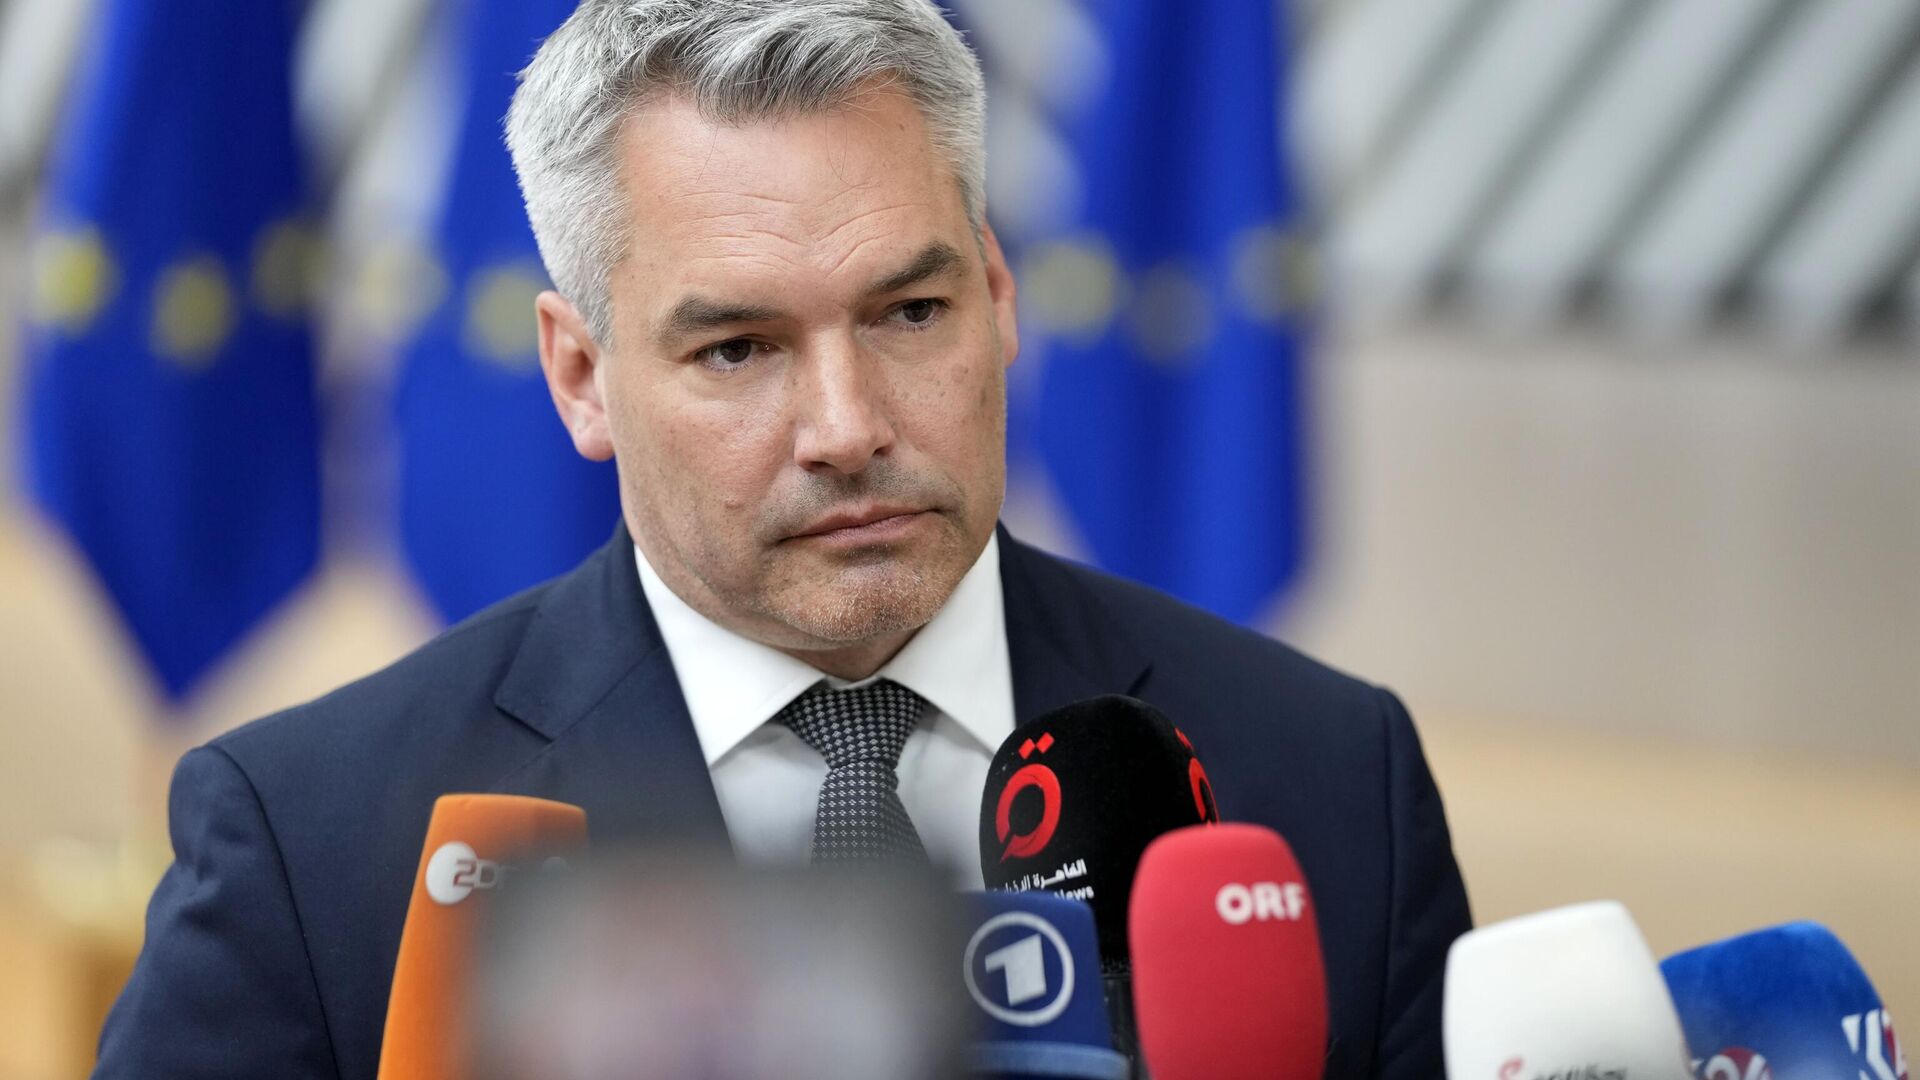 Austria's Chancellor Karl Nehammer speaks with the media as he arrives for an EU summit at the European Council building in Brussels, Thursday, June 29, 2023. European leaders meet for a two-day summit to discuss Ukraine, migration and the economy. - Sputnik International, 1920, 01.07.2023